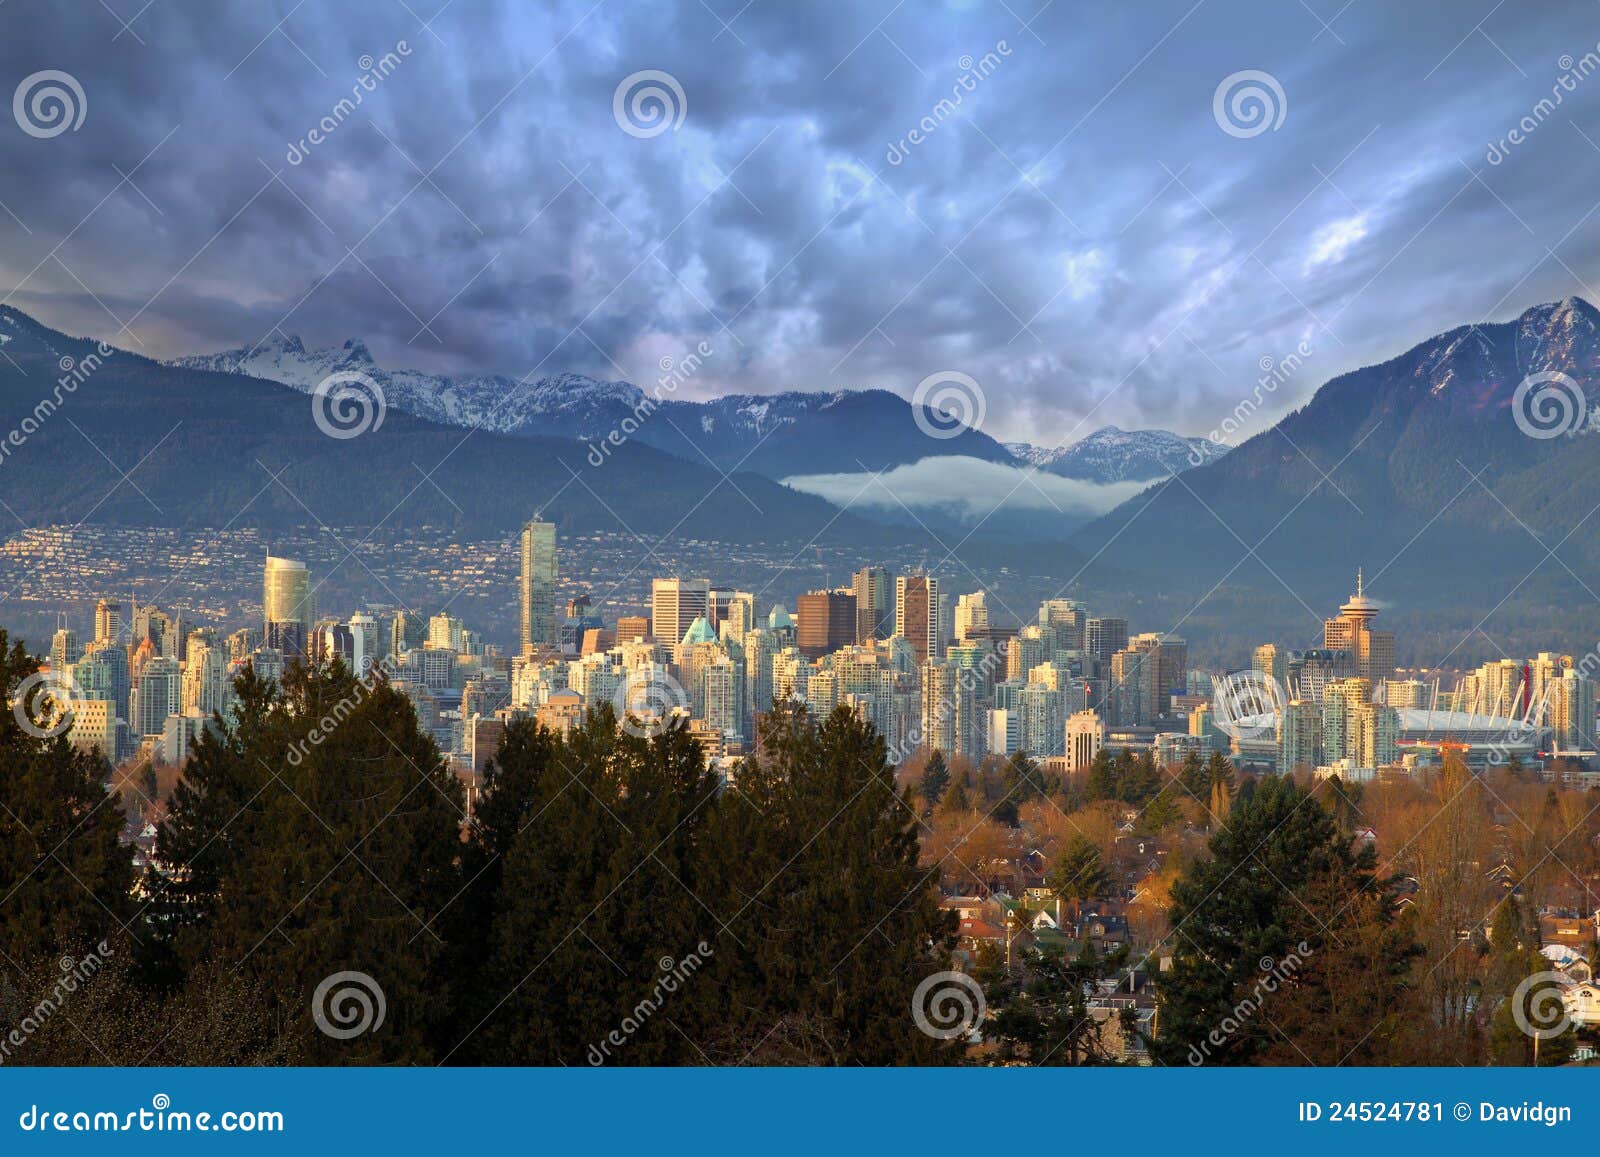 vancouver bc city skyline with mountains